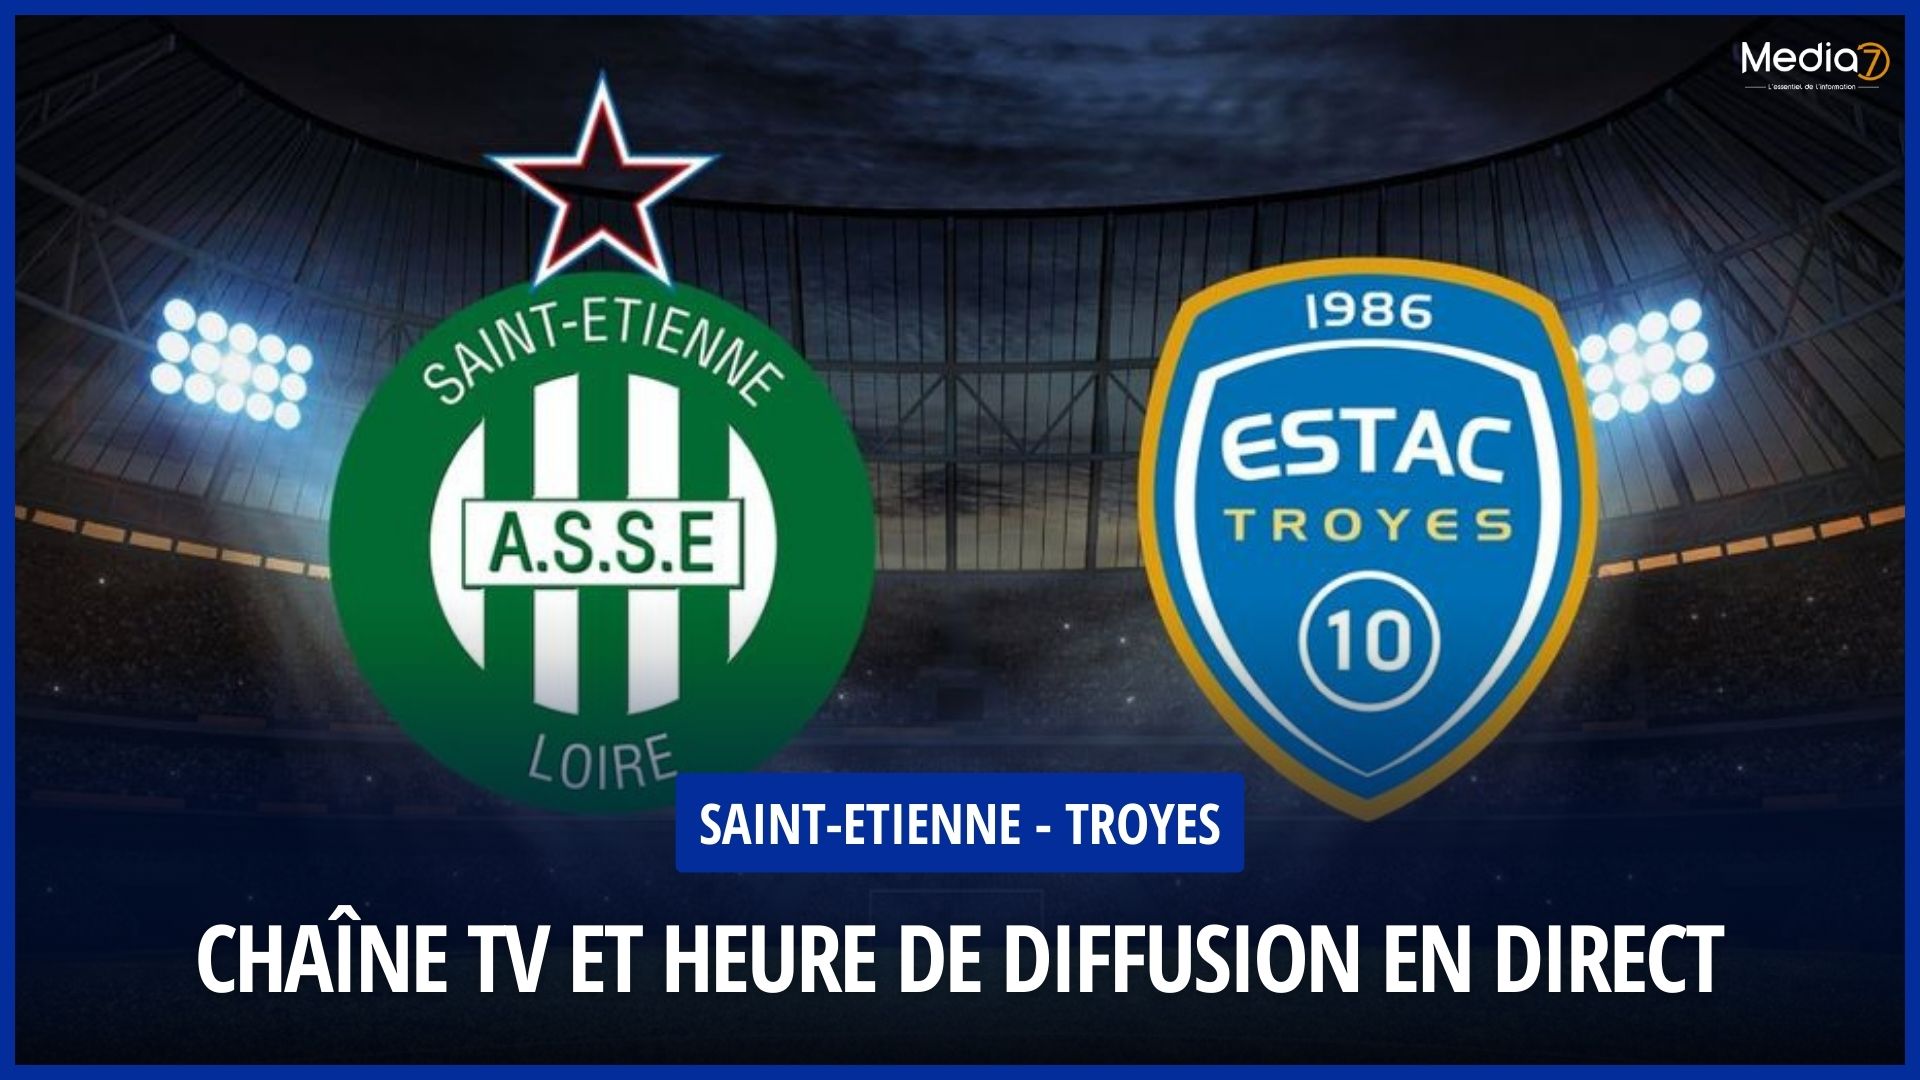 Saint-Étienne - Troyes Match Live: TV Channel and Broadcast Schedule - Media7